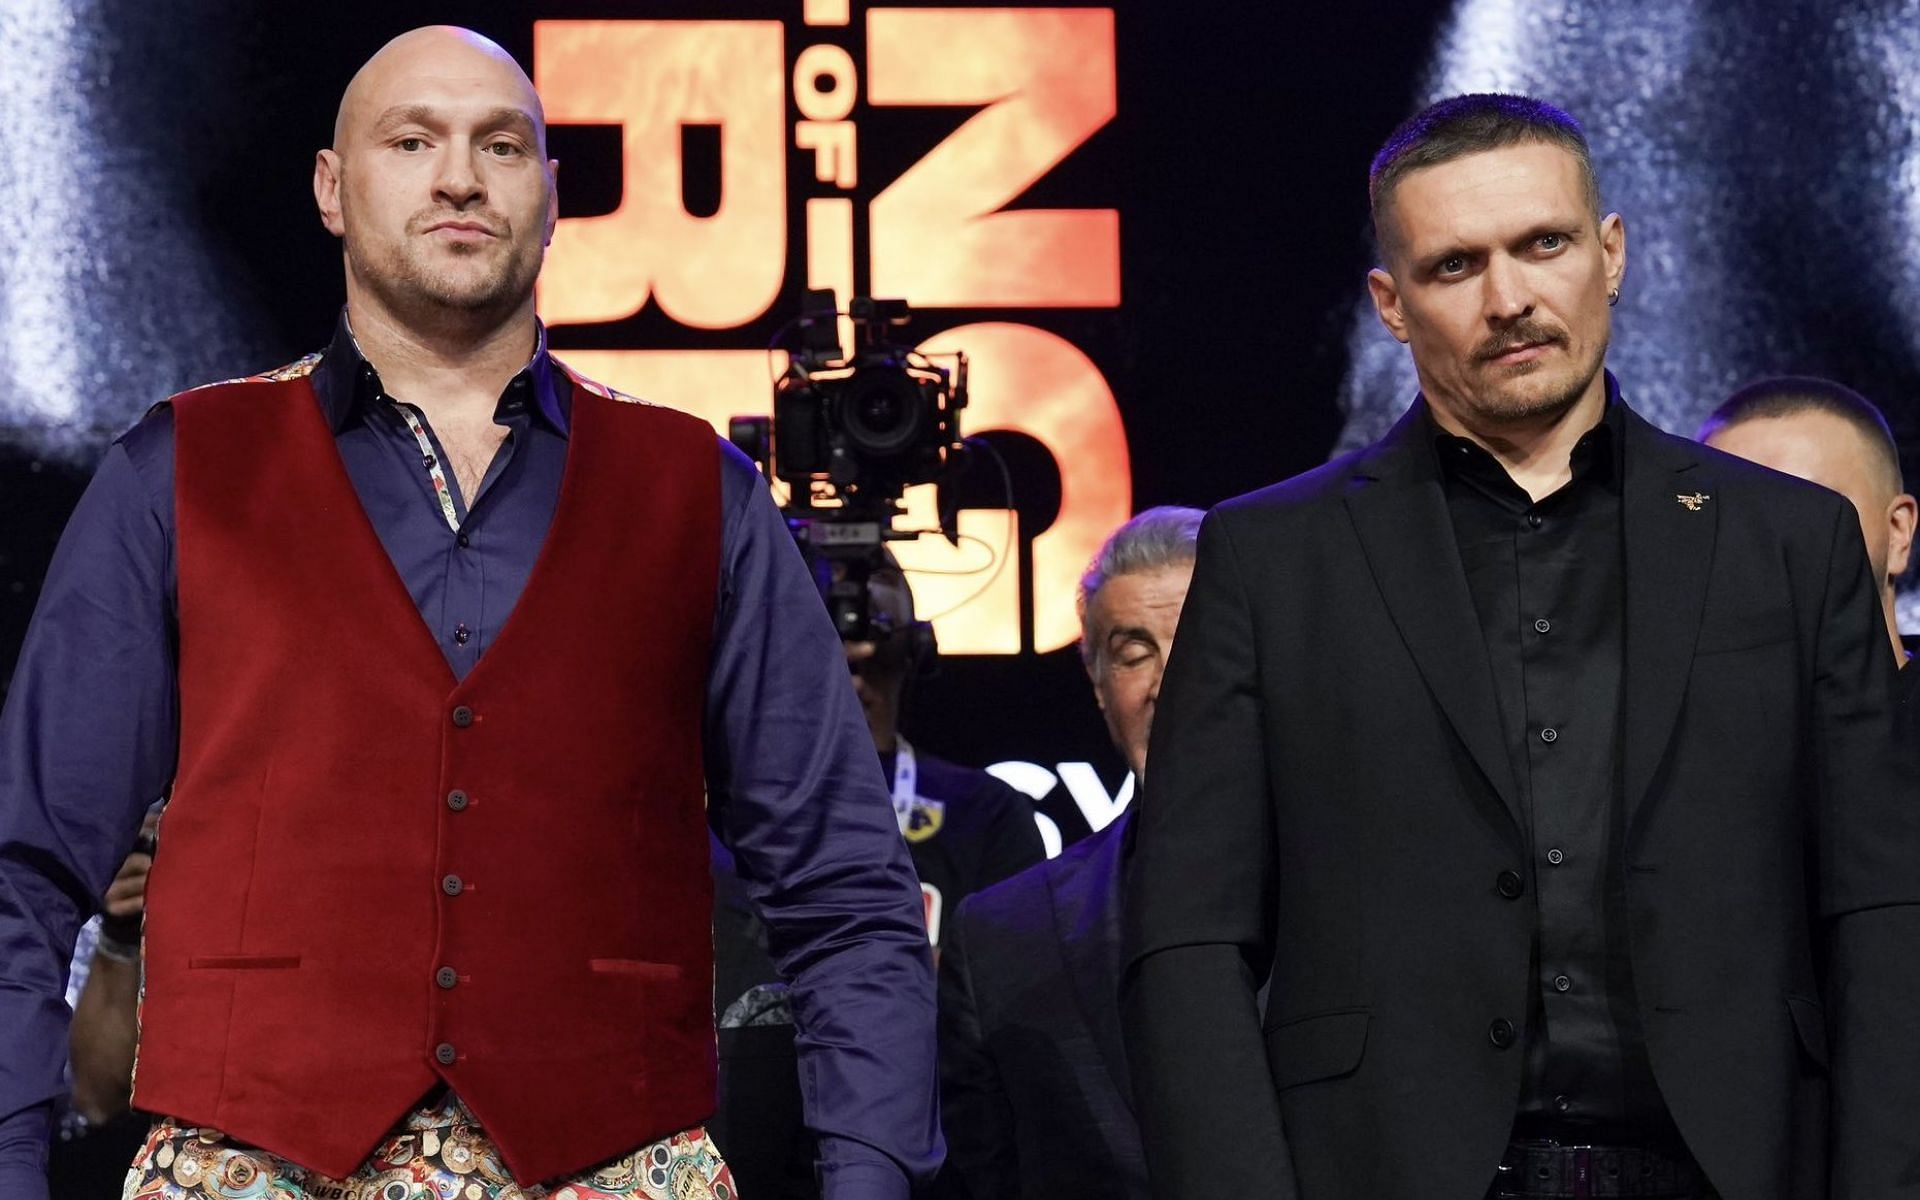 Tyson Fury (left) and Oleksandr Usyk on stage (right) (Image courtesy @Queensberry on X)